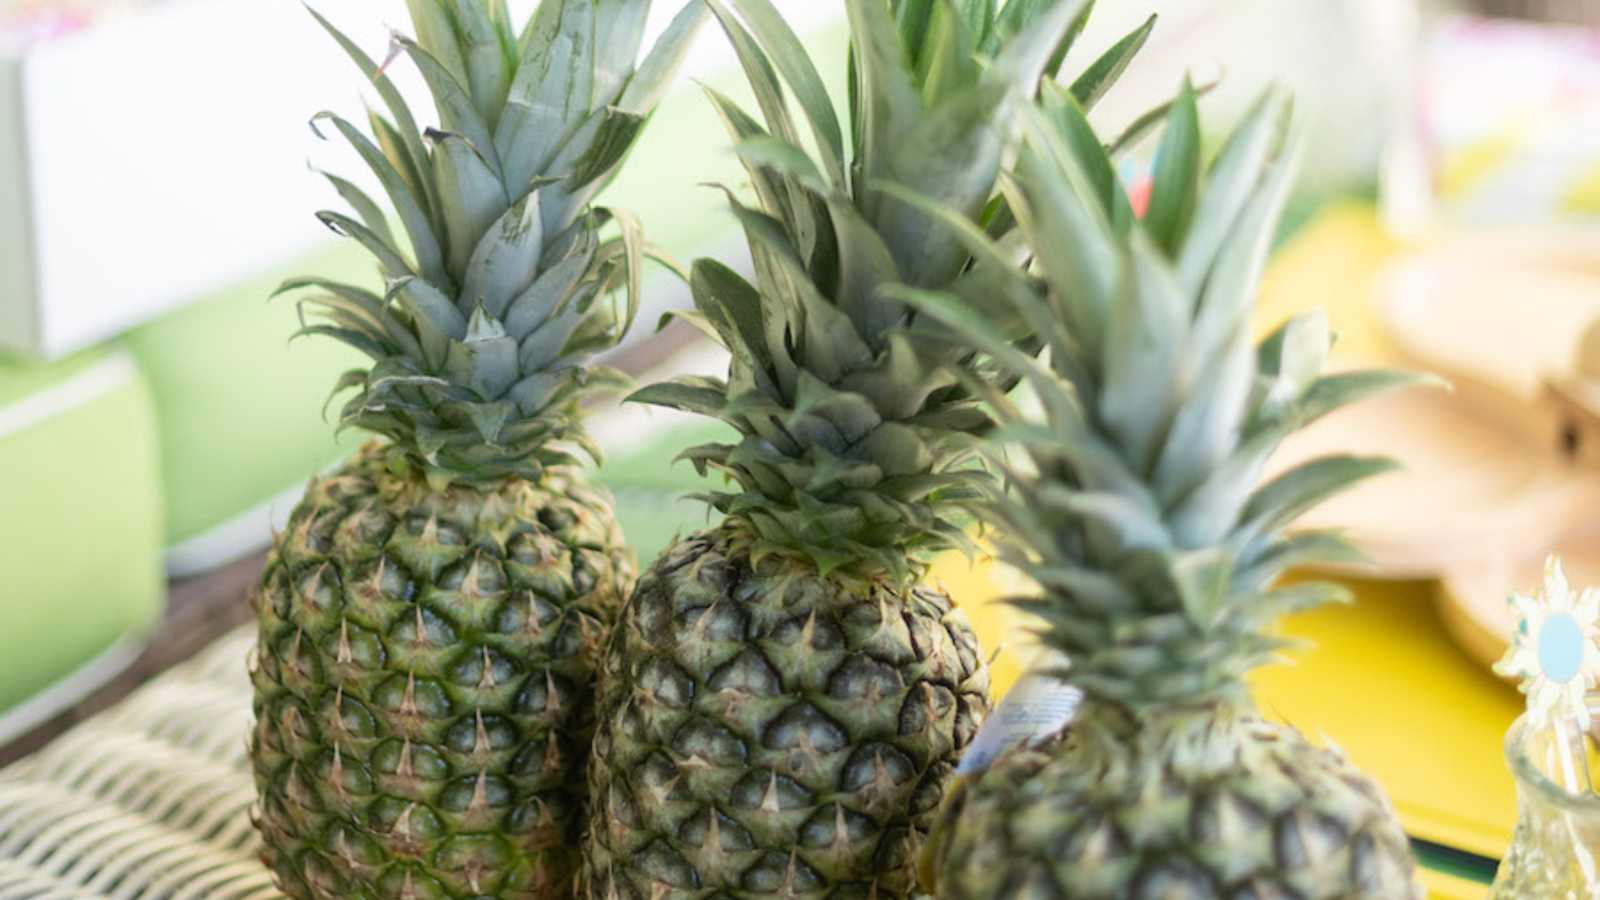 A fresh pineapple on the table is a beautiful way to welcome guests into your home when you are hosting.